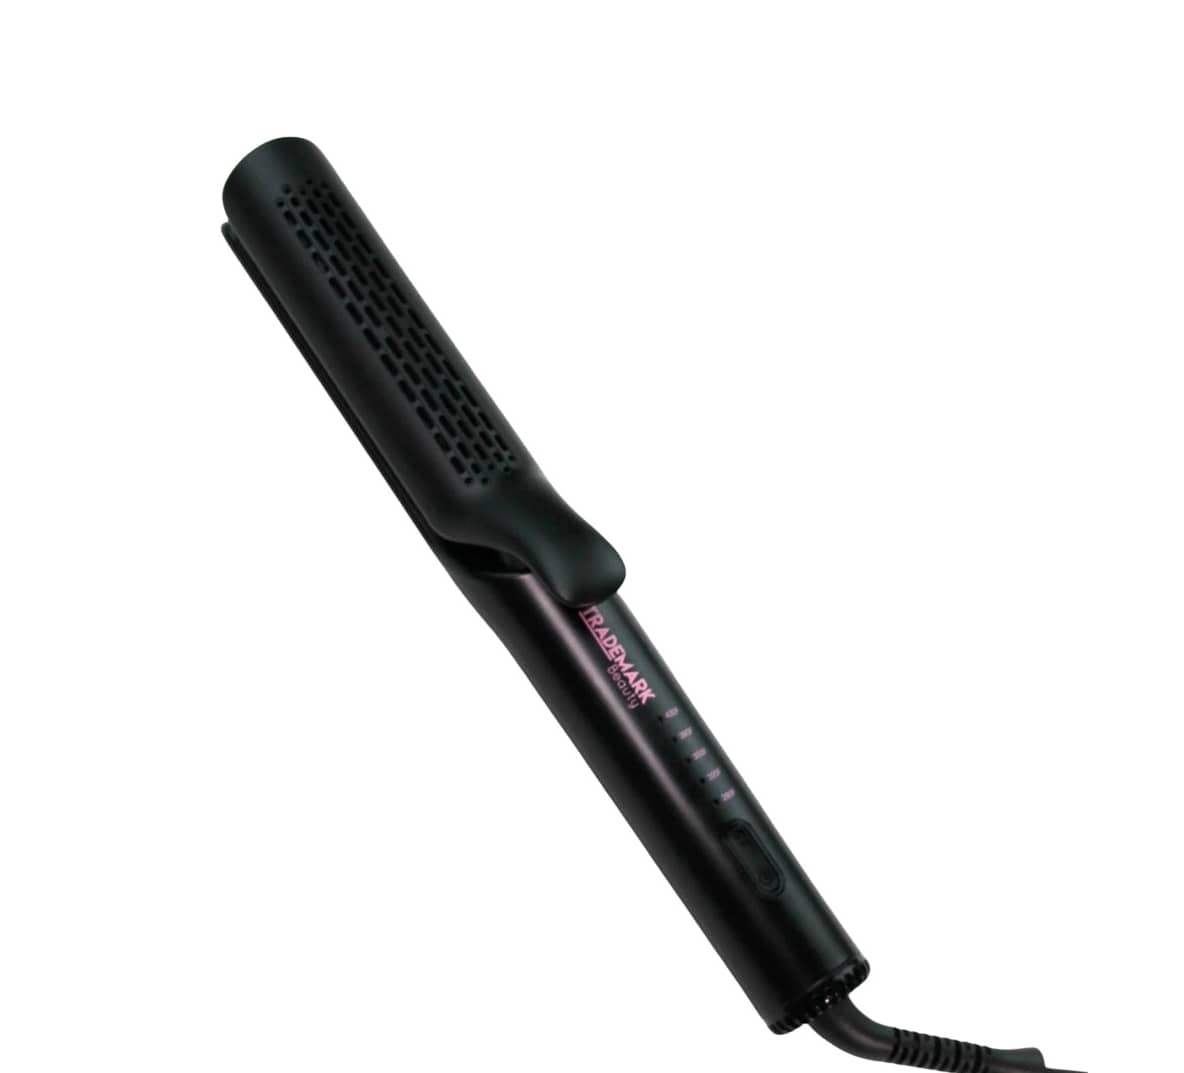 The 7 Best Hair Straighteners, According to Pro Stylists - Buy Side from WSJ